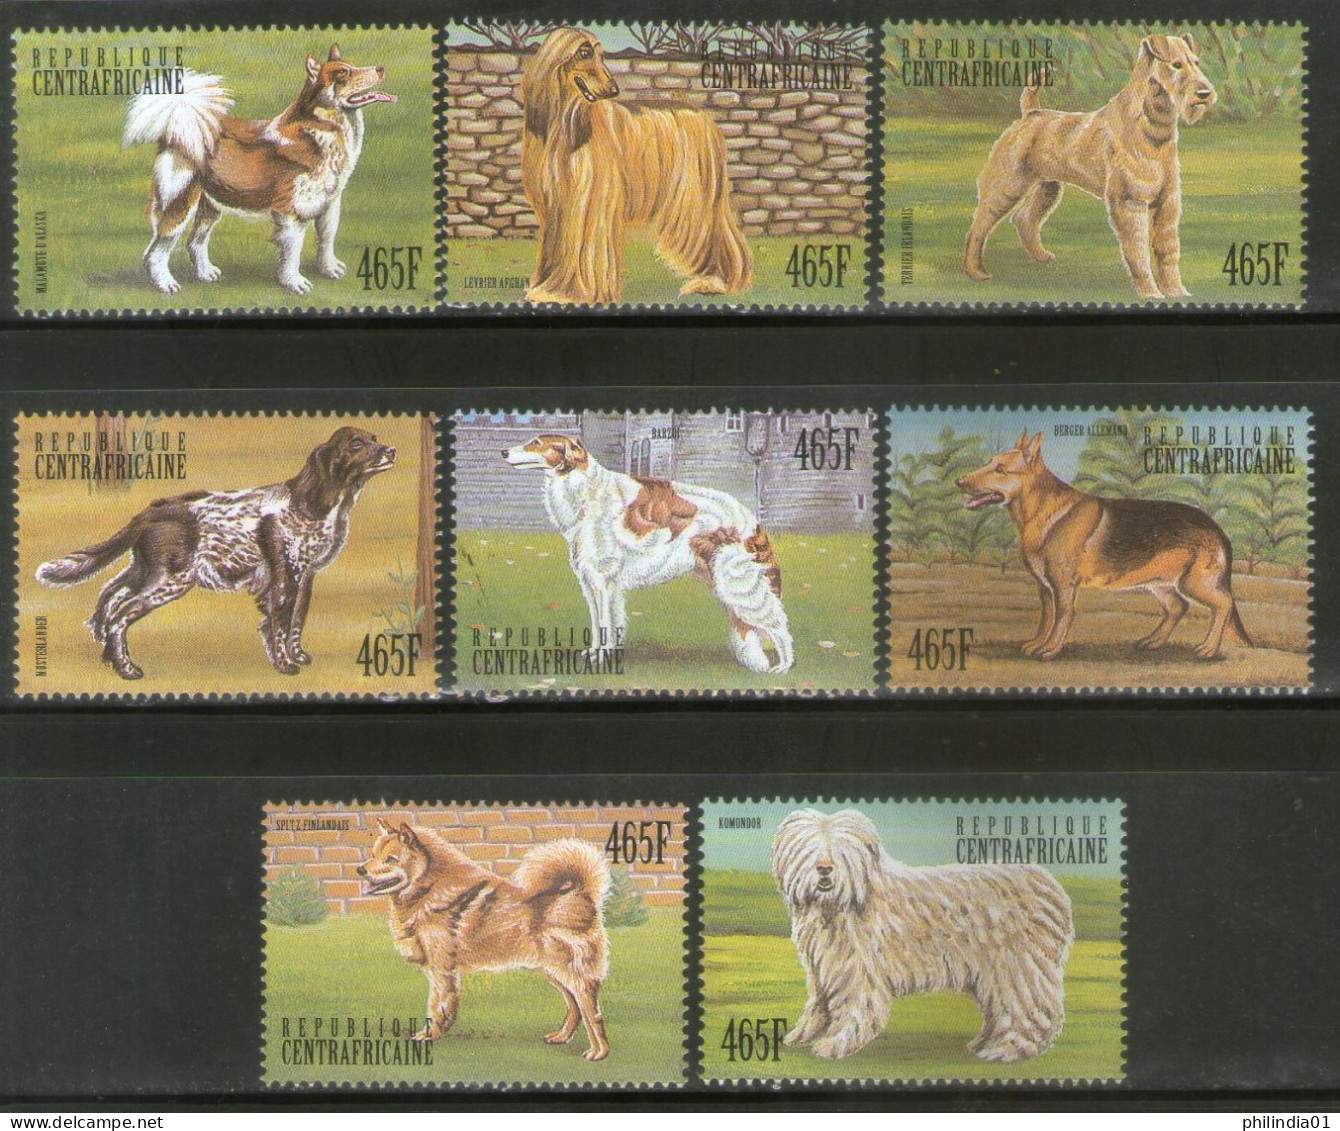 Central African Rep. 1999 Dogs Pet Animals Sc 1284 8v MNH # 449 - Hunde